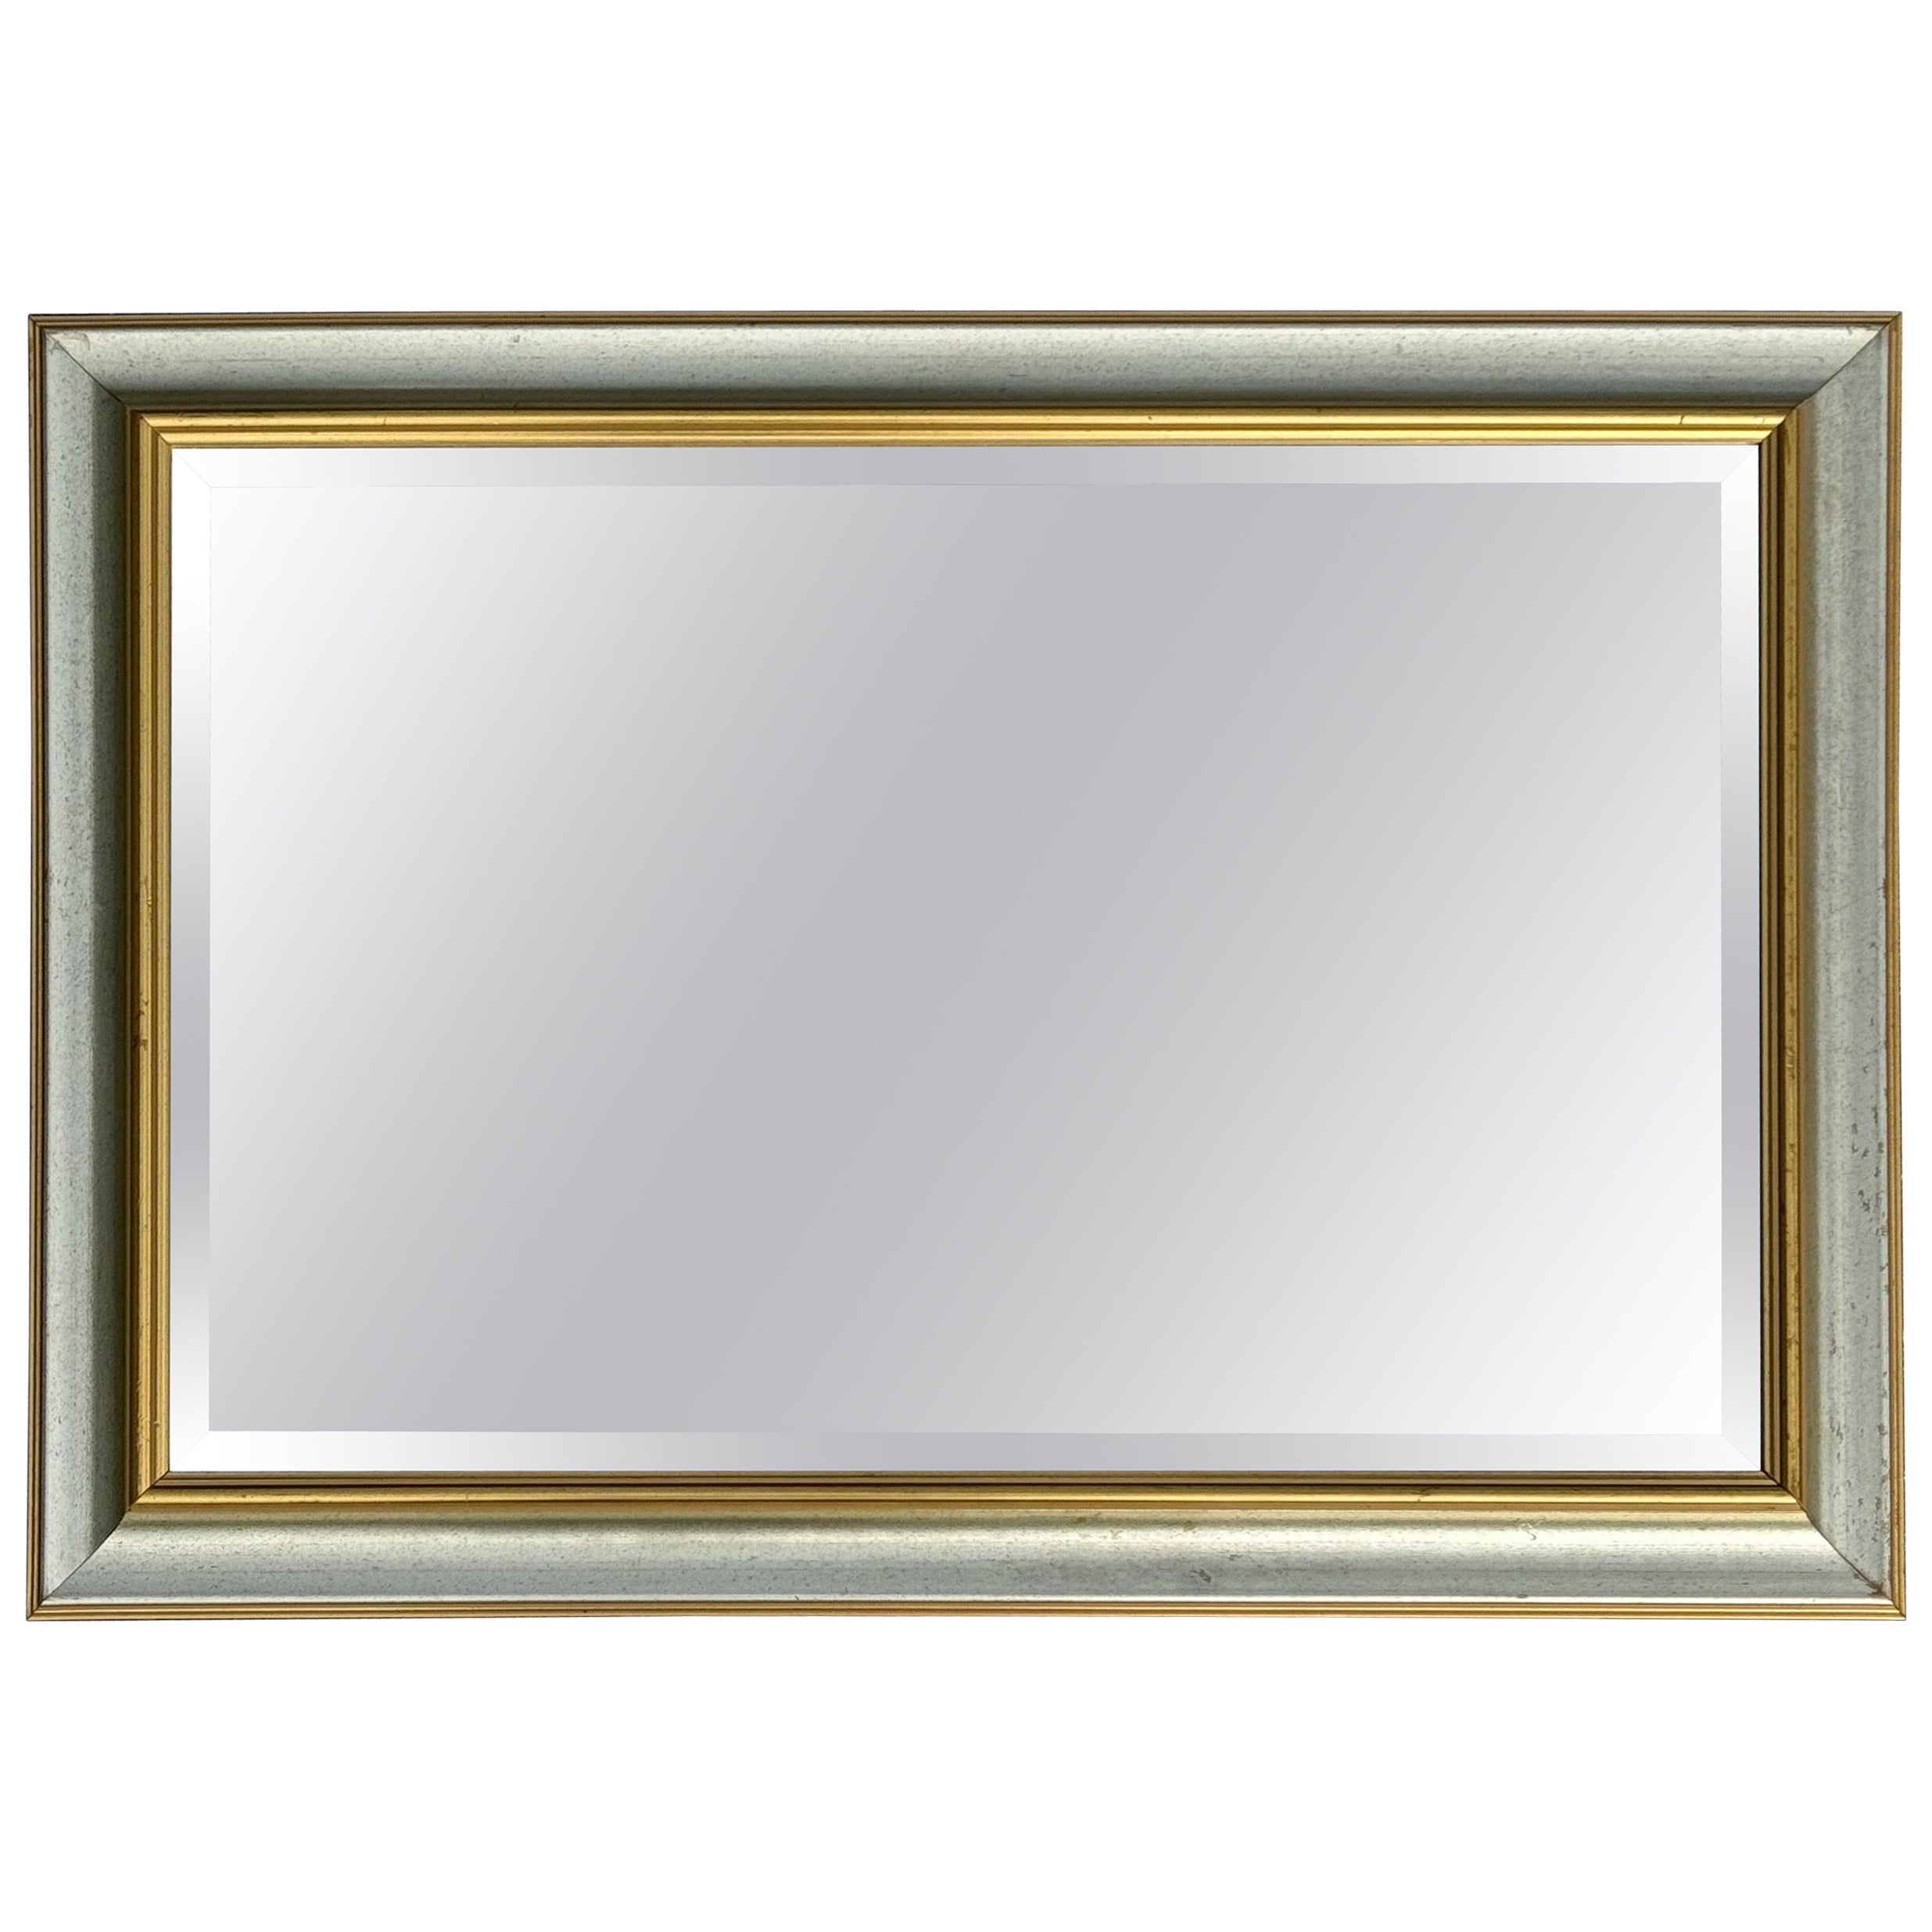 LOVELY SILVER & GOLD BEVELLED MiRROR For Sale